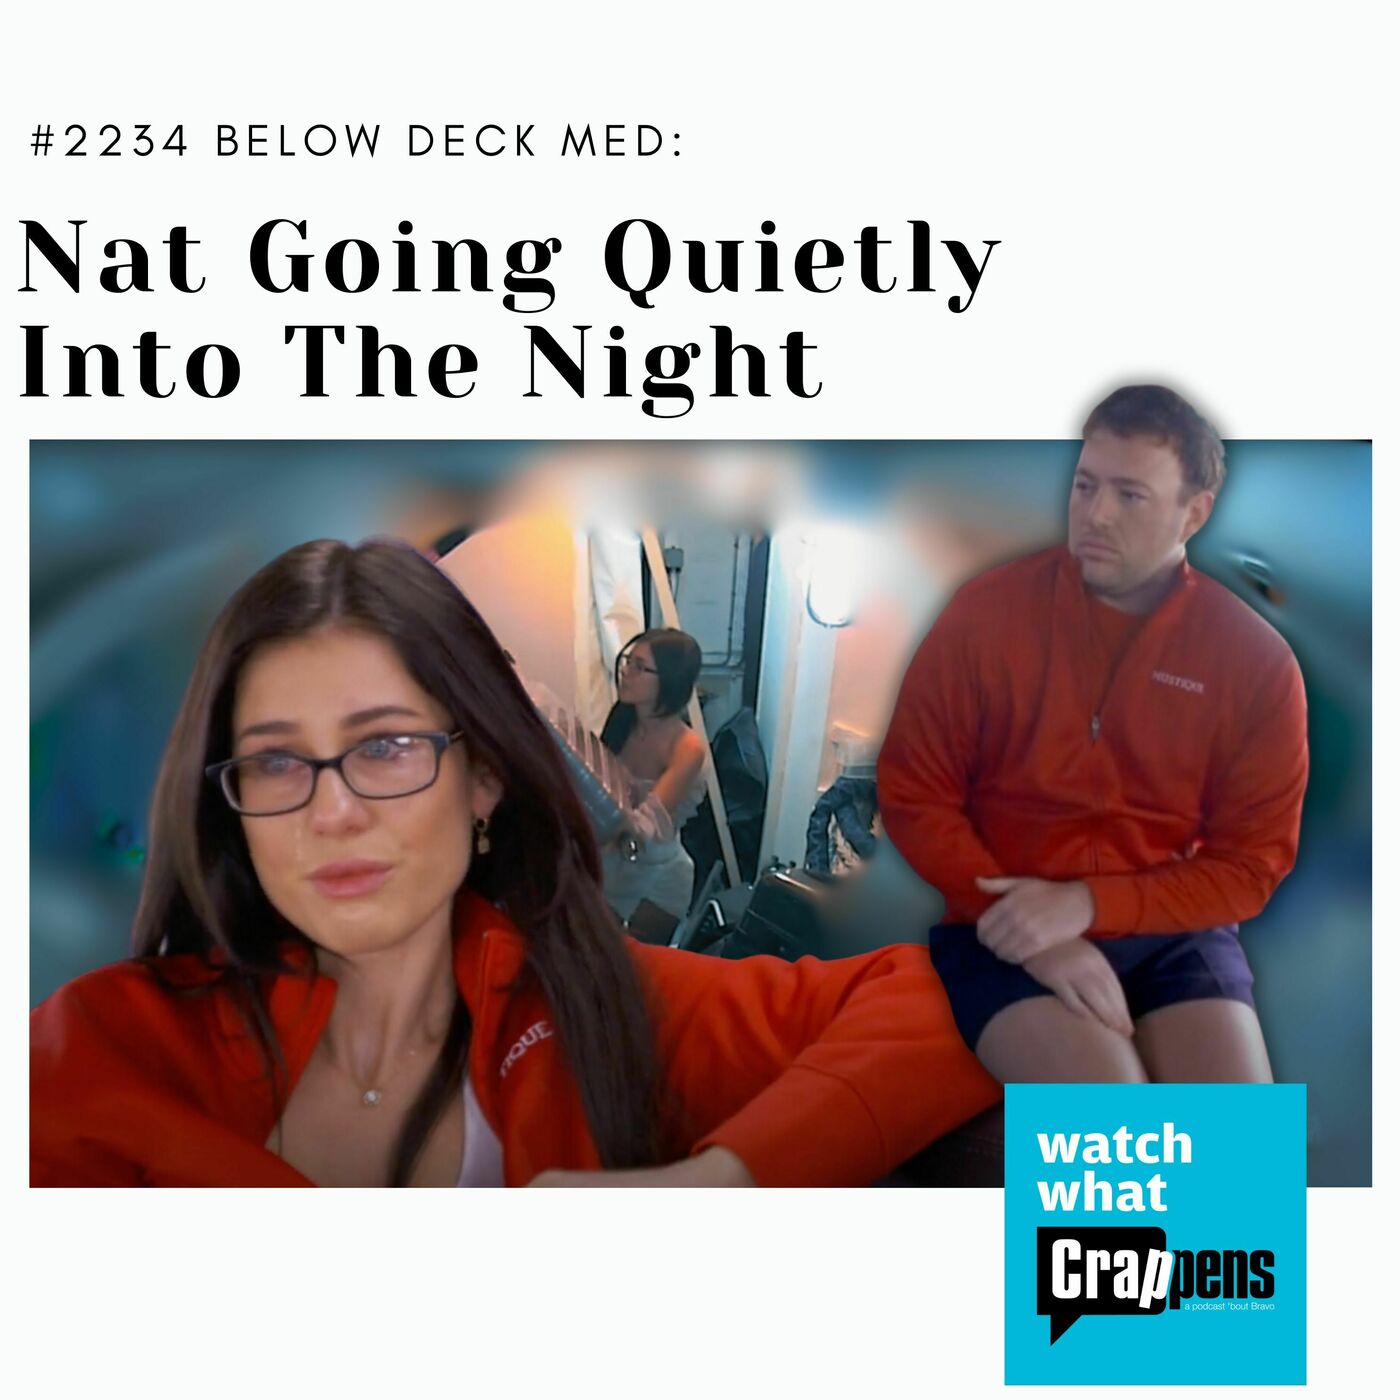 #2234 Below Deck Med: Nat Going Quietly Into The Night